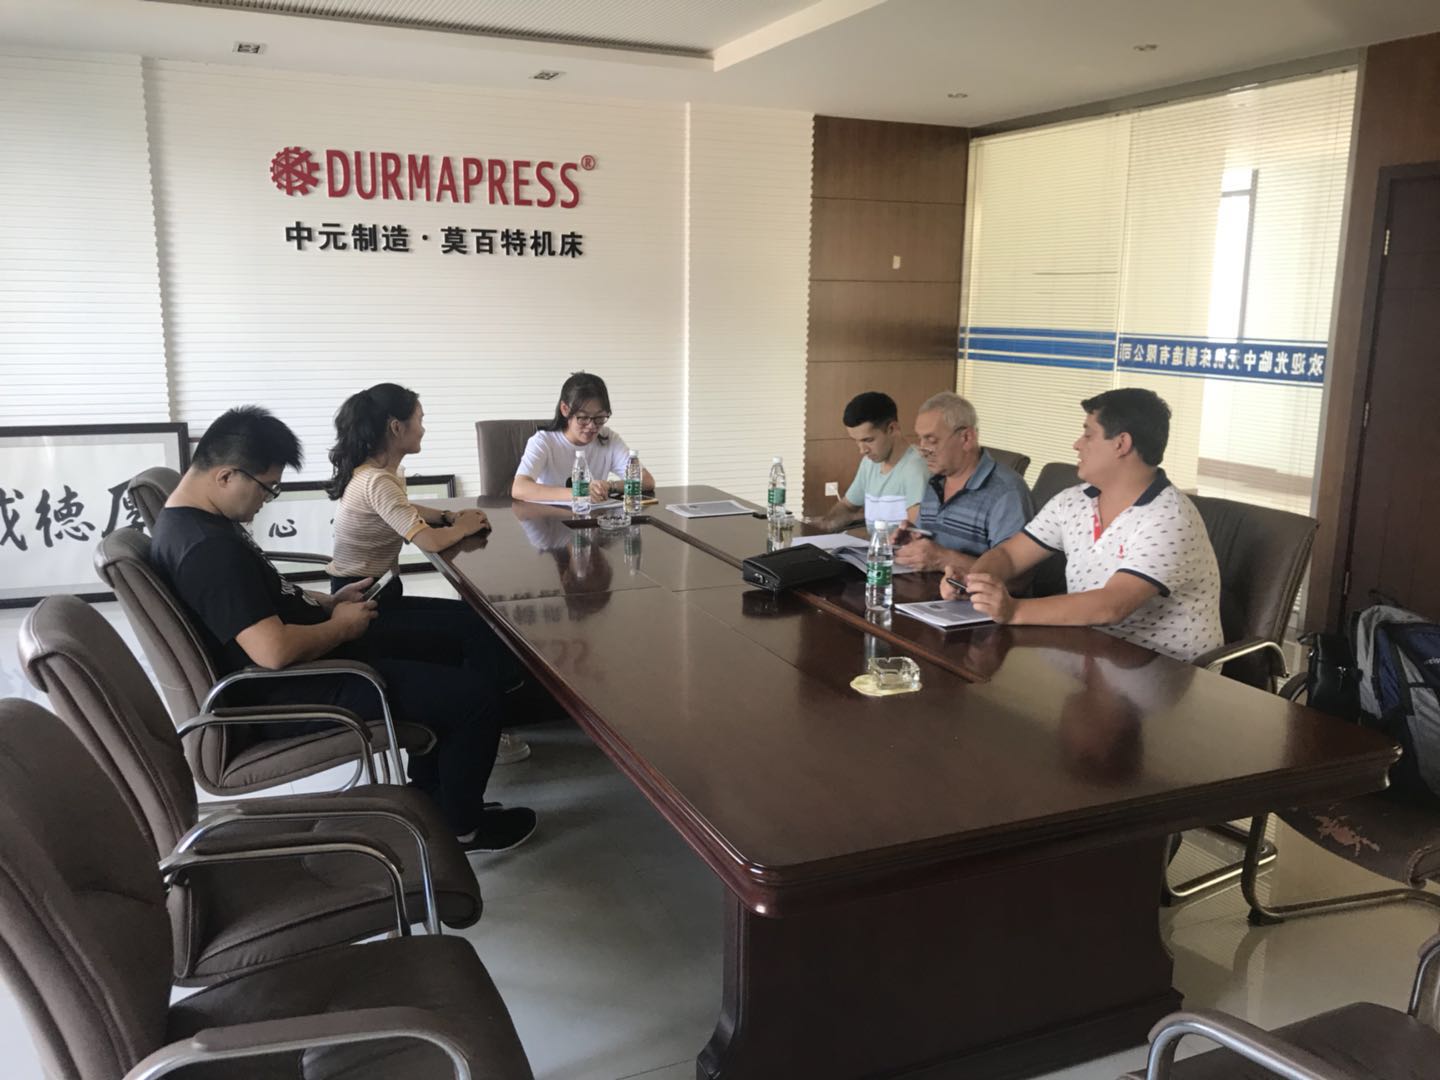 Welcome Clients from Uzbekistan puchase the WC67K 160T 4000 and QC12K 16X4000 with Durmapress